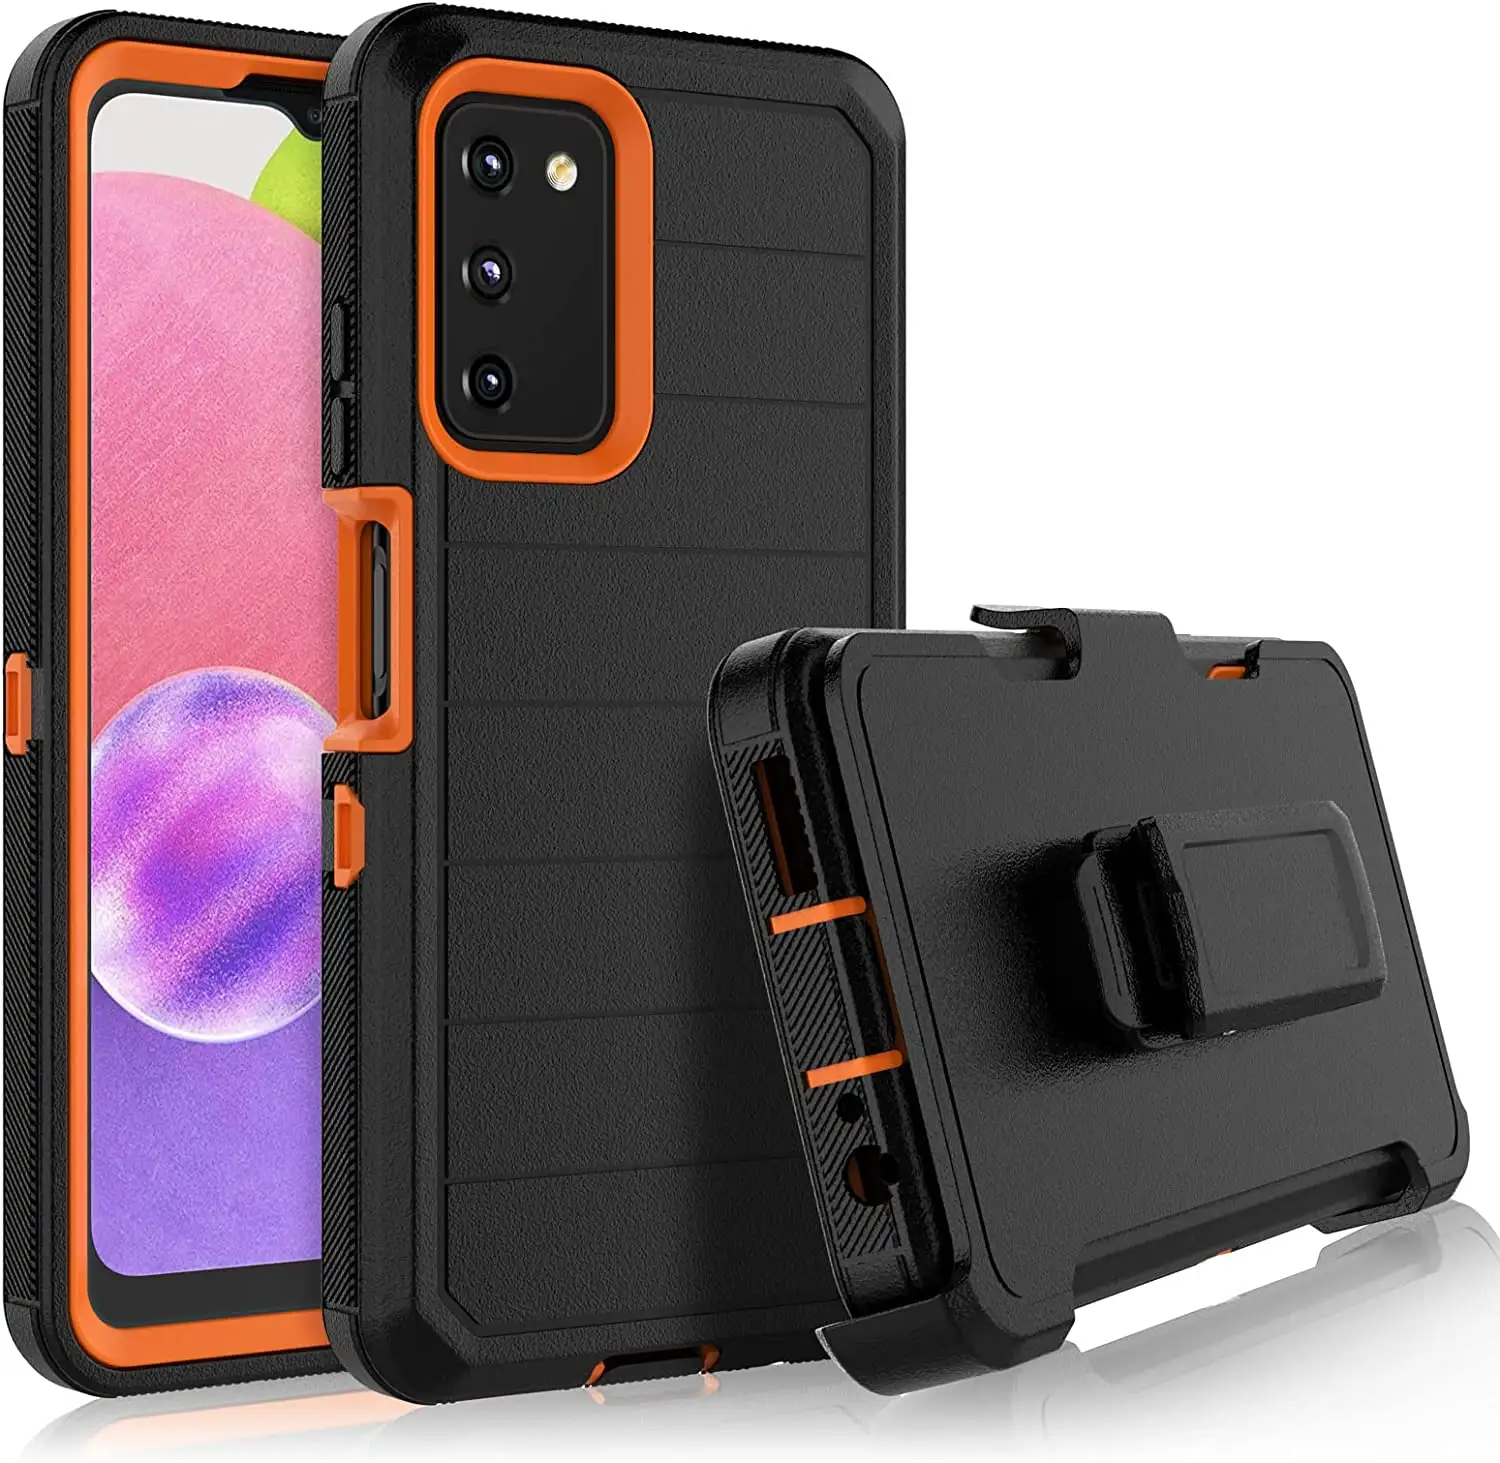 Rugged Case for OnePlus Nord N300 5G Belt Clip Holster Built-in Screen Heavy Duty Swivel Holster Kickstand Hard Shell cover